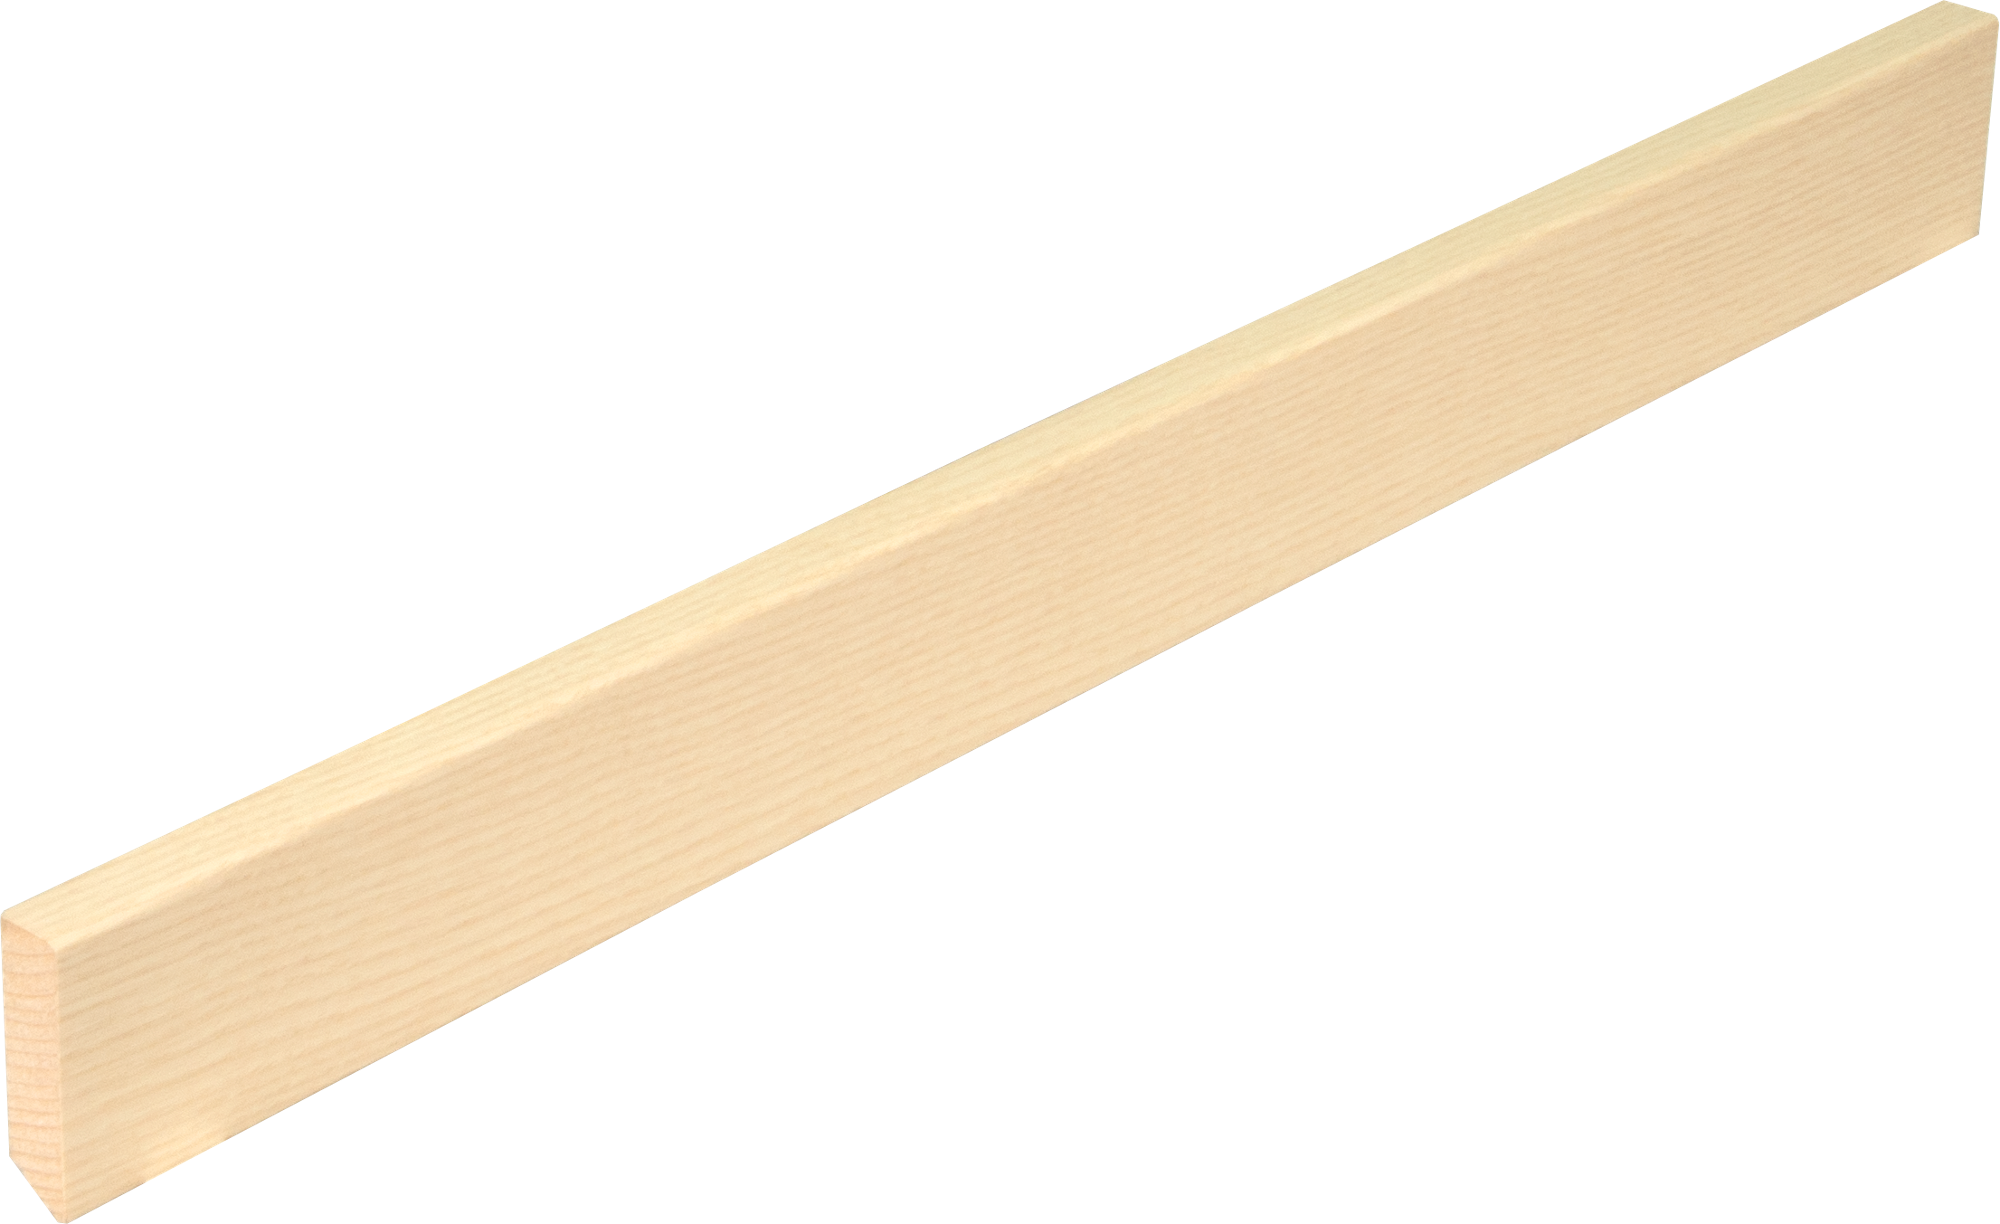 Skirtings veneered, Ash, Live Pure
16x58x2700mm
matching Ash Live Pure lacqued surfaces